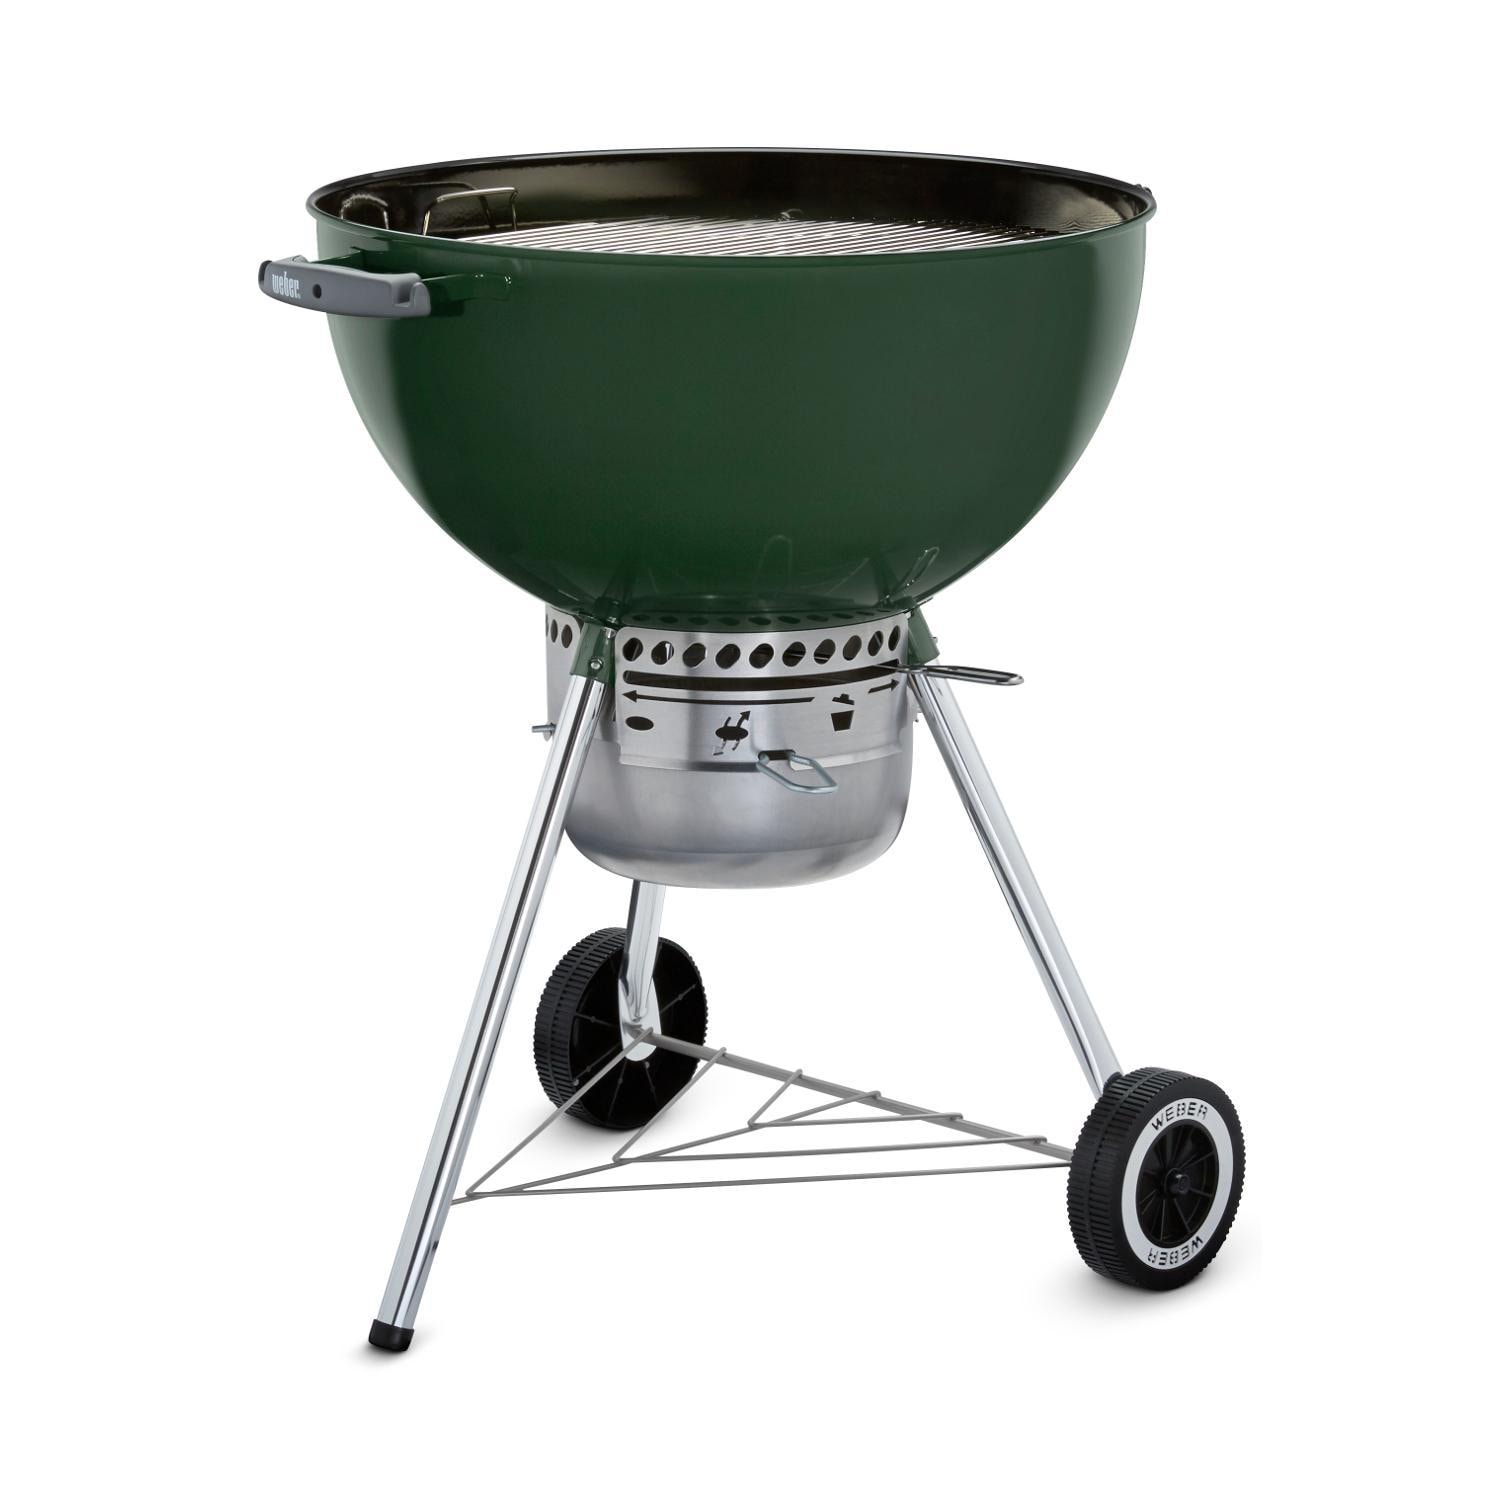 Weber Original Kettle Premium 22-Inch Charcoal Grill - Green - 14407001 - image 4 of 6